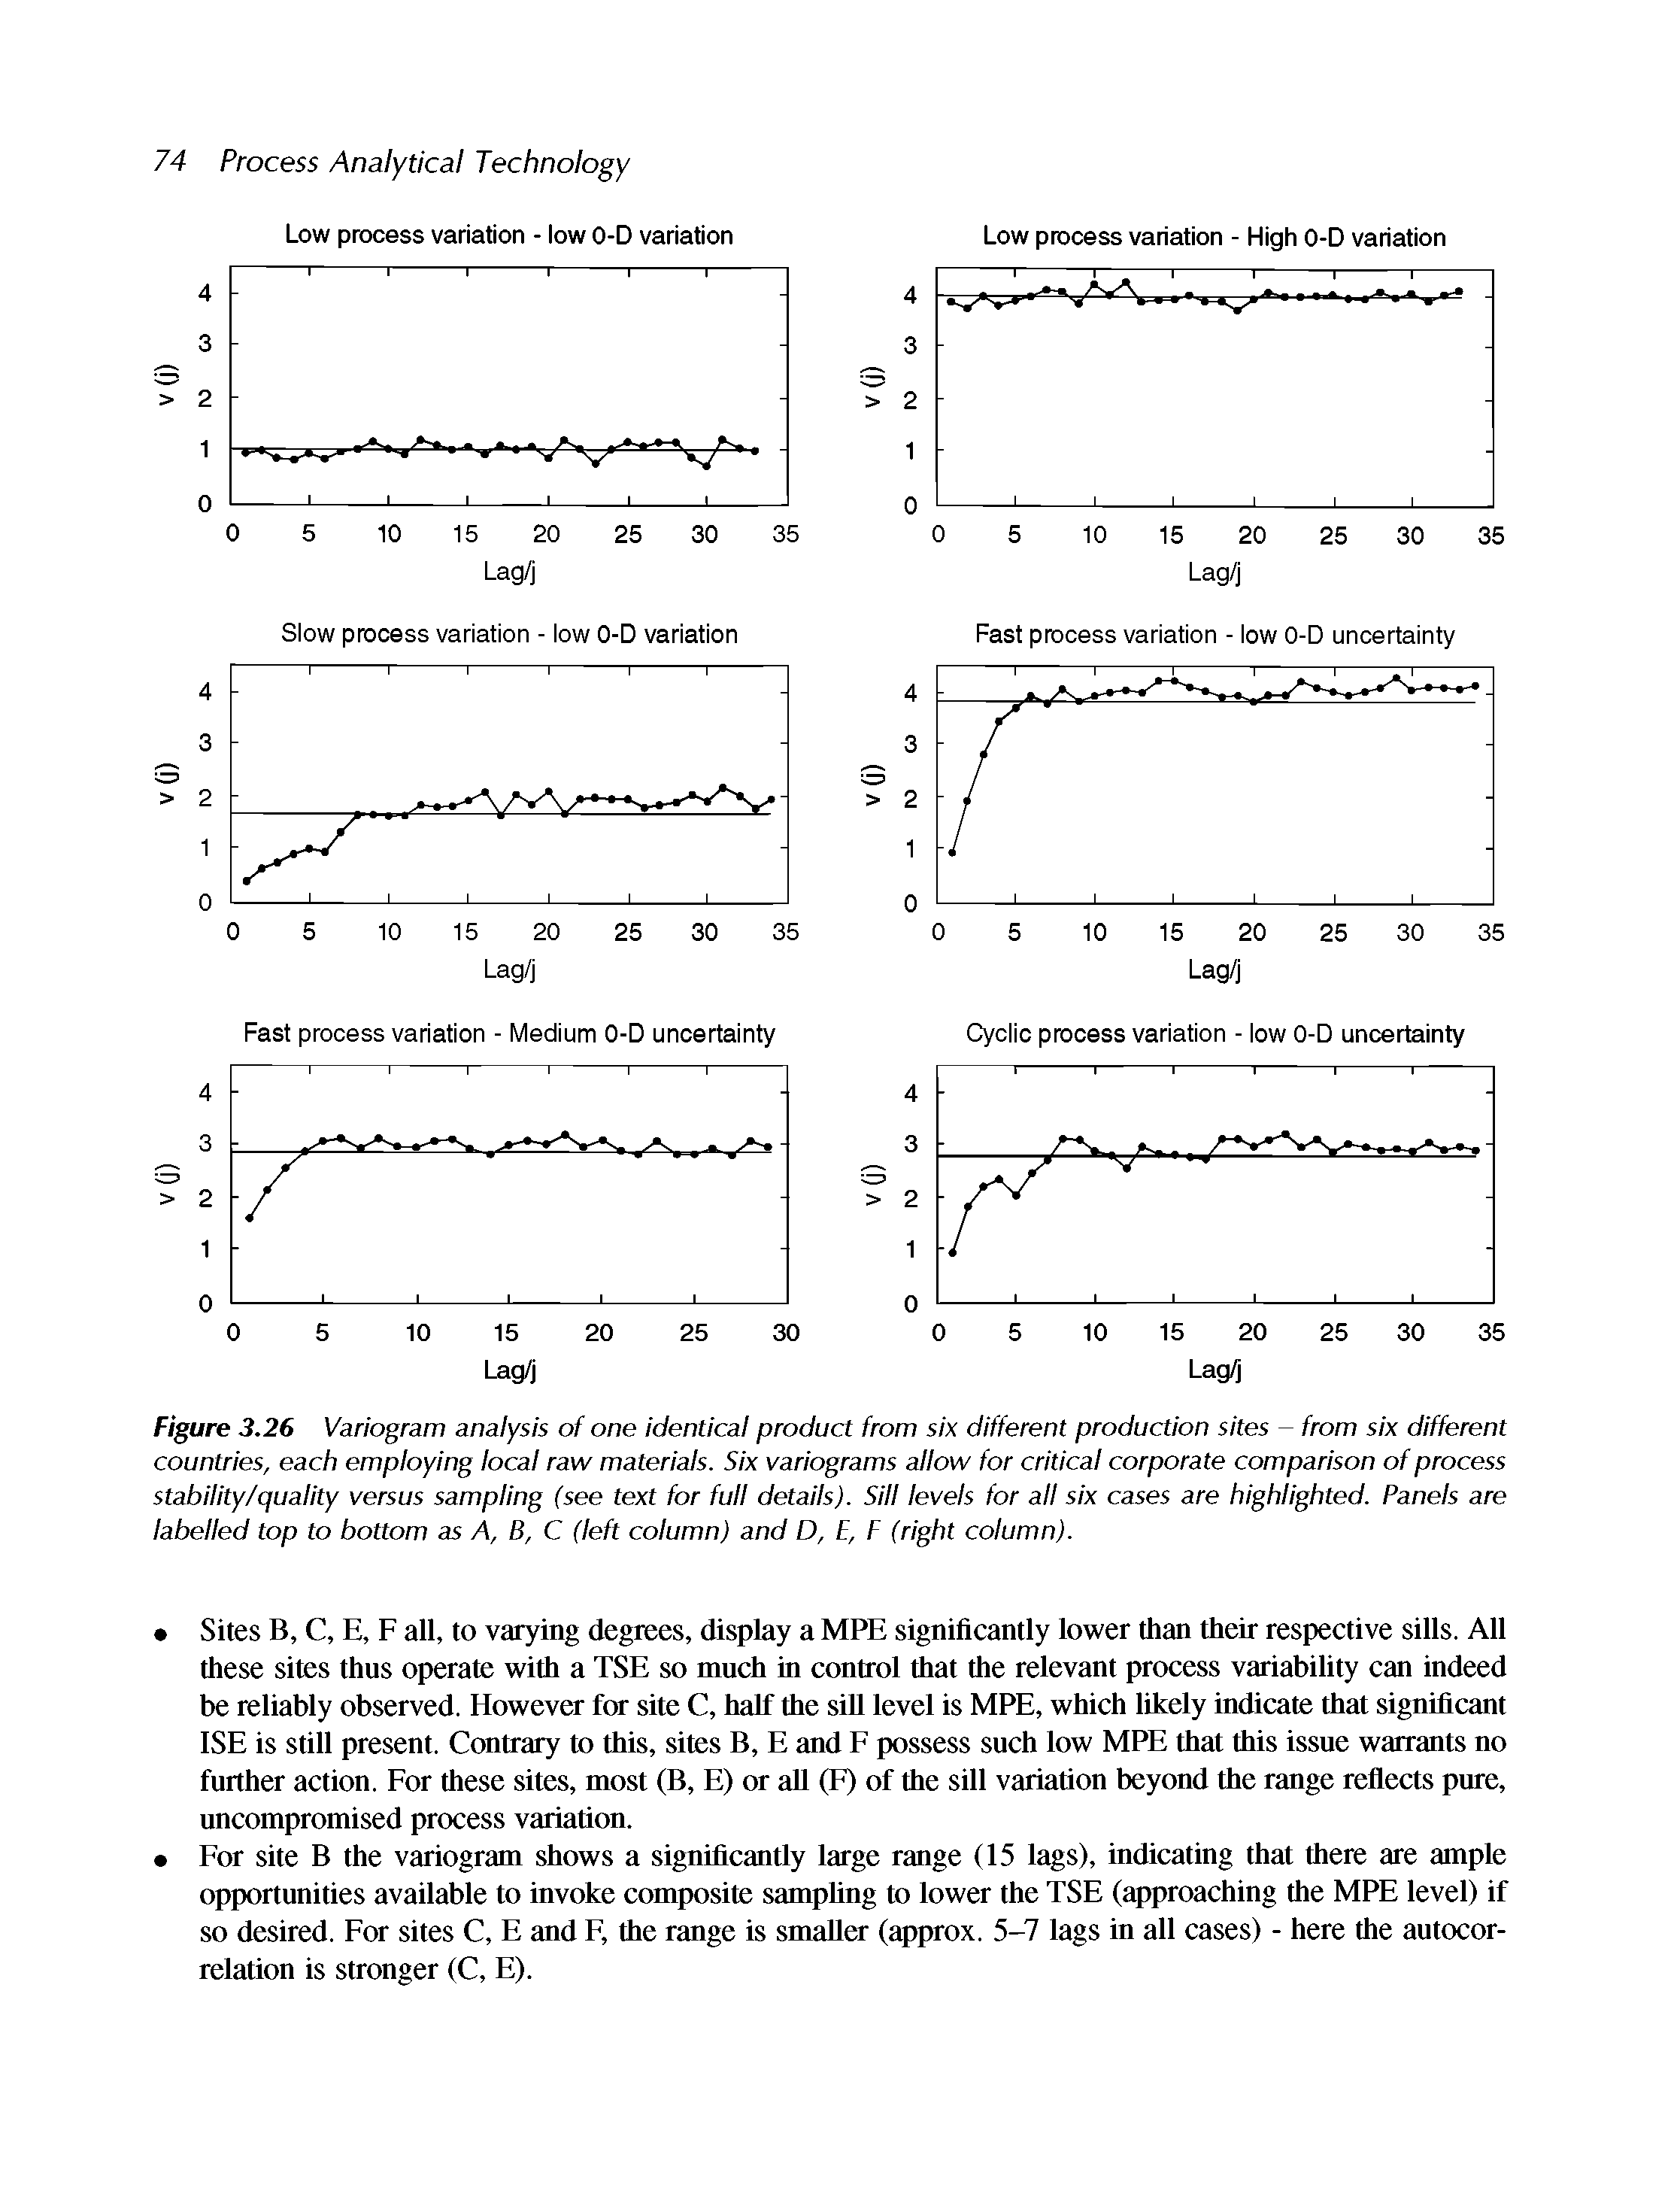 Figure 3.26 Variogram analysis of one identical product from six different production sites - from six different countries, each employing local raw materials. Six variograms allow for critical corporate comparison of process stability/quality versus sampling (see text for full details). Sill levels for all six cases are highlighted. Panels are labelled top to bottom as A, B, C (left column) and D, E, F (right column).